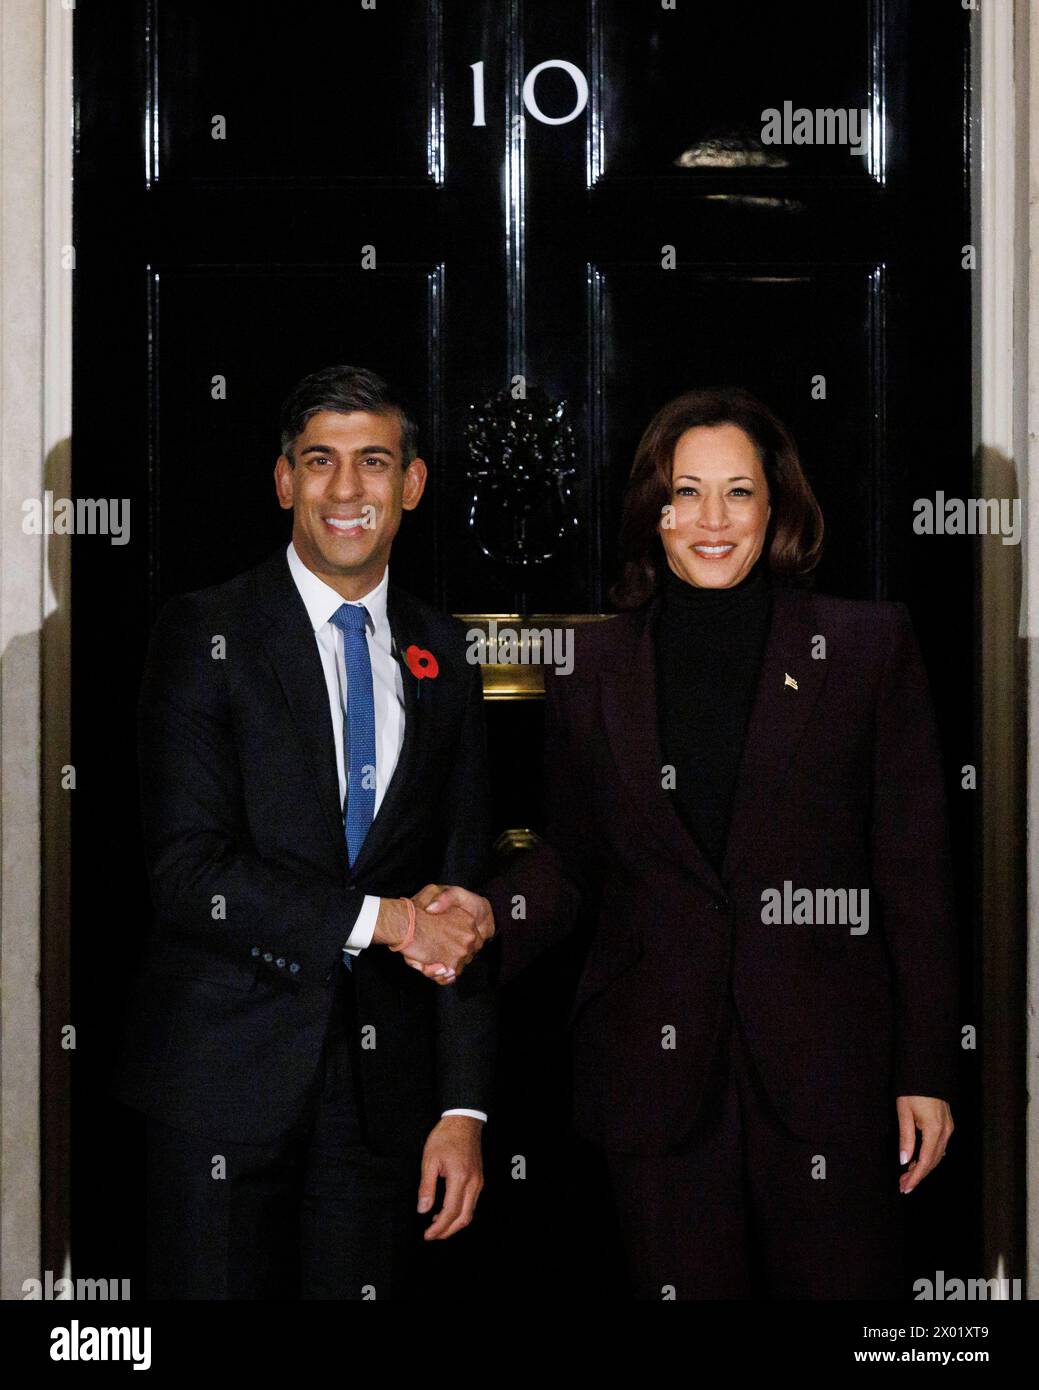 [MccLi0006310]  Vice President of the United States Kamala Harris visits Downing Street this afternoon. British Prime Minister Rishi Sunak receives he Stock Photo